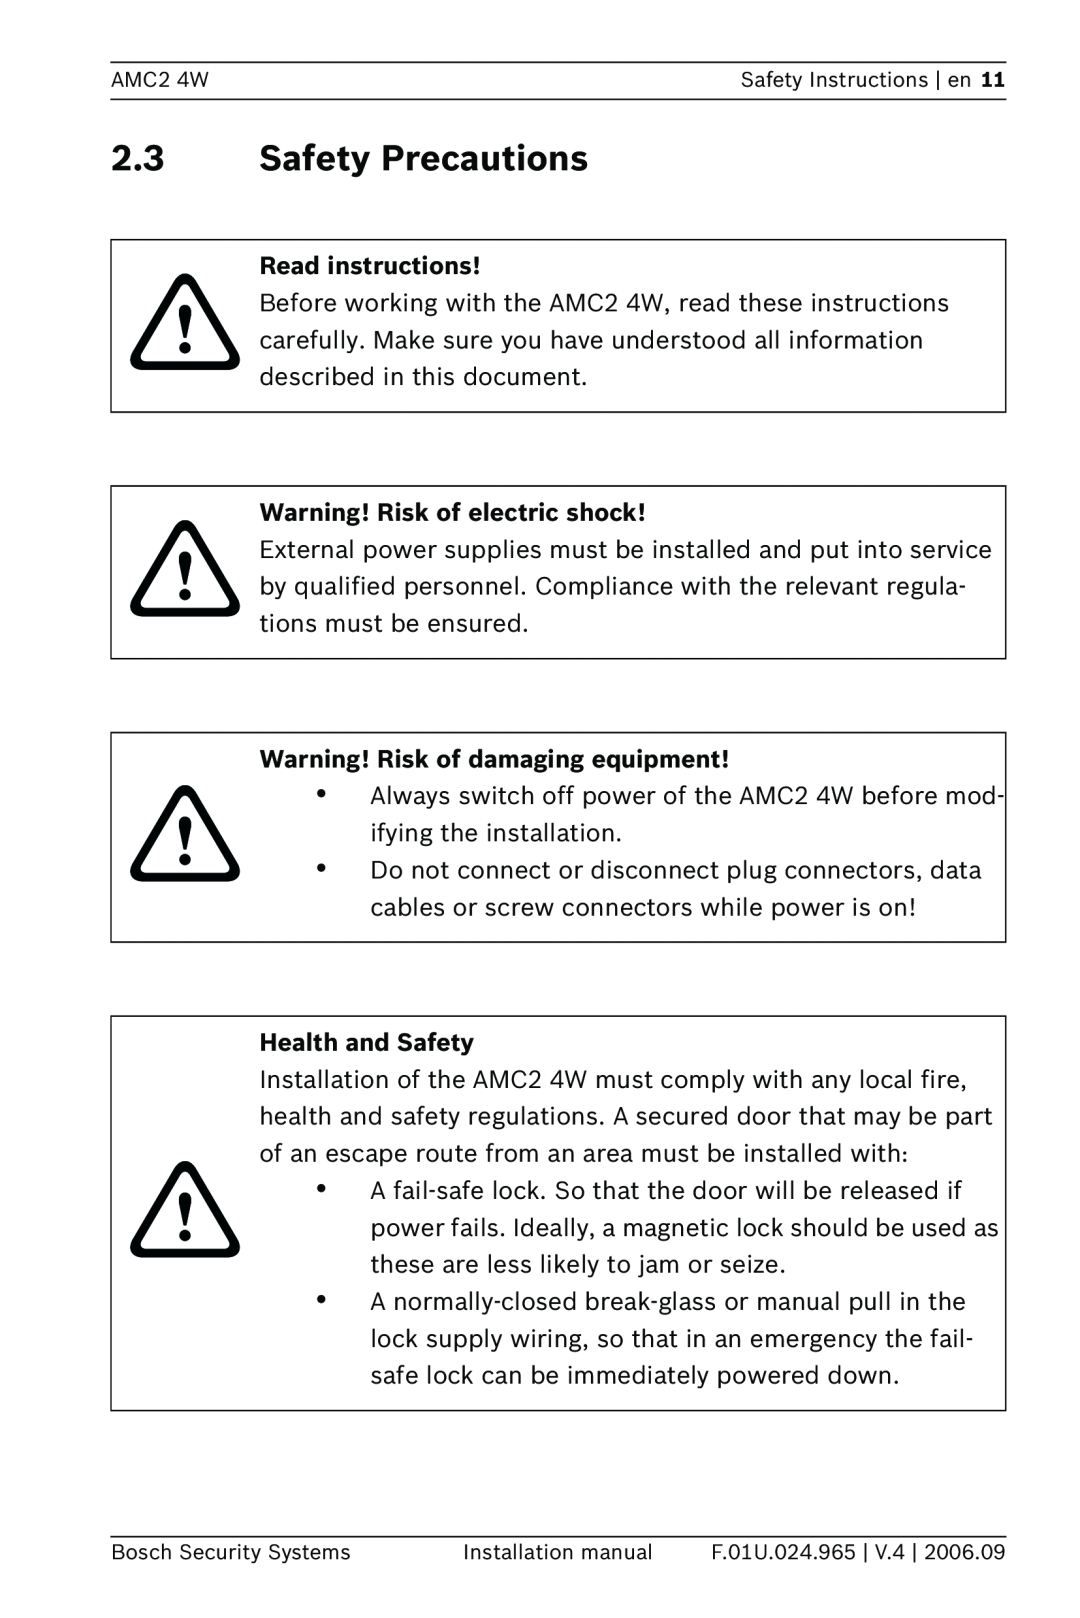 Bosch Appliances APC-AMC2-4W 2.3Safety Precautions, Read instructions, Warning! Risk of electric shock, Health and Safety 